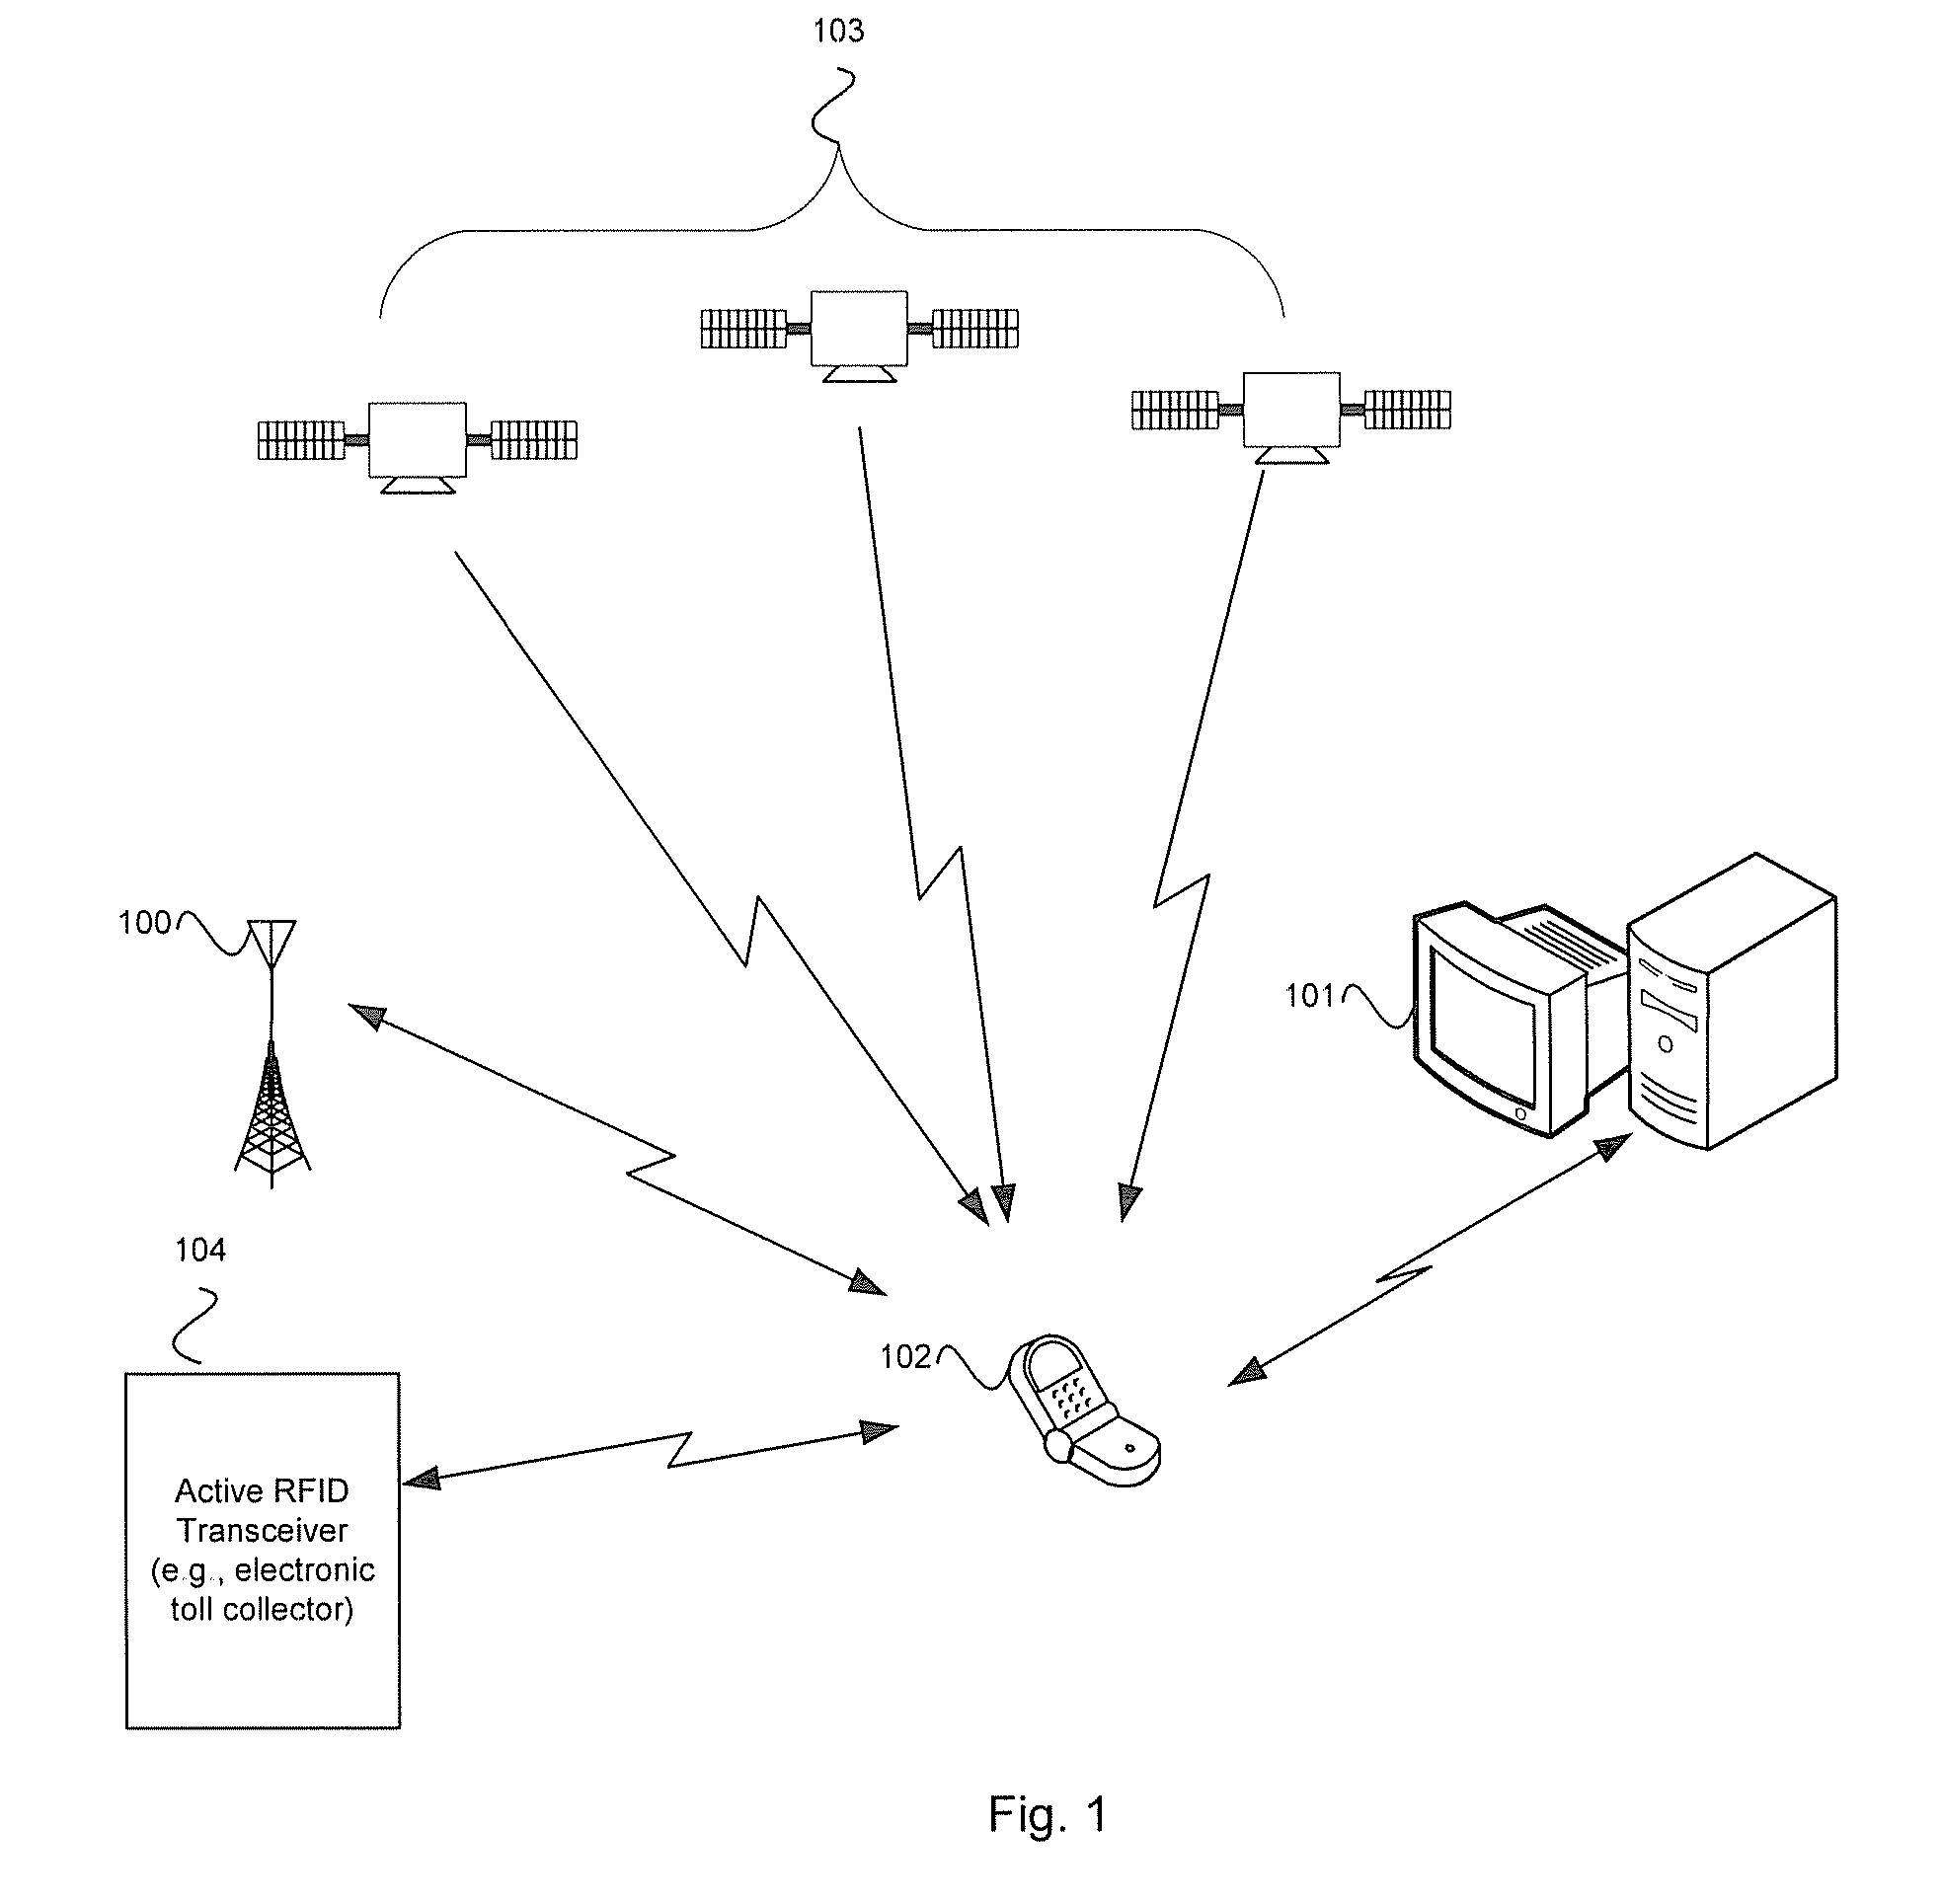 Method and System for Interfacing to a Plurality of Antennas